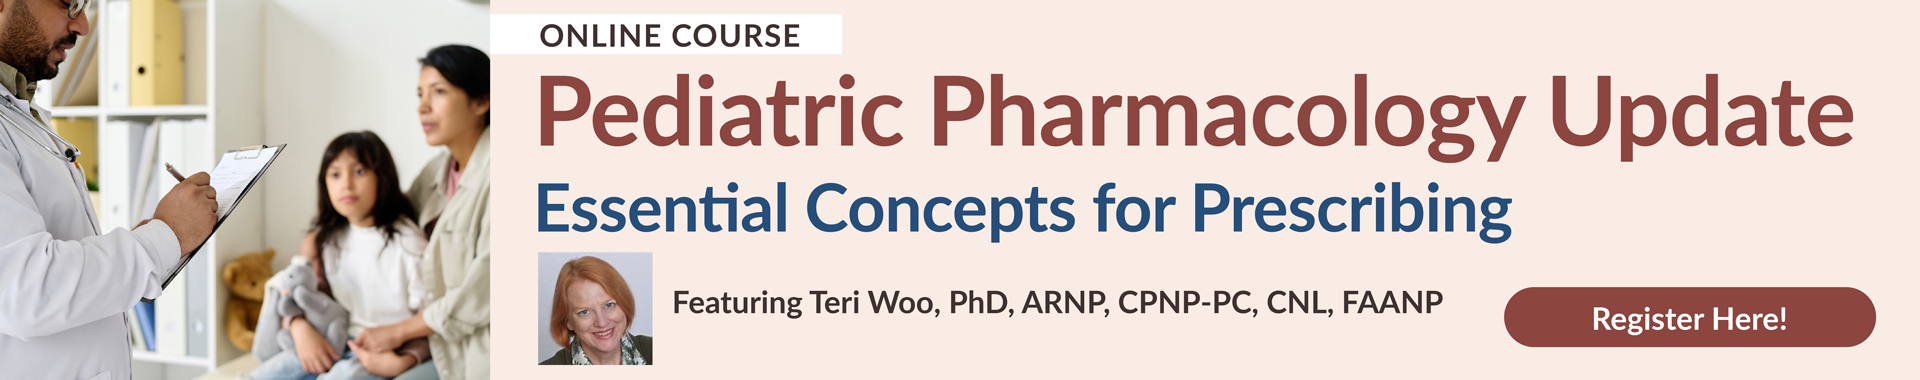 Pediatric Pharmacology Update: Essential Concepts for Prescribing